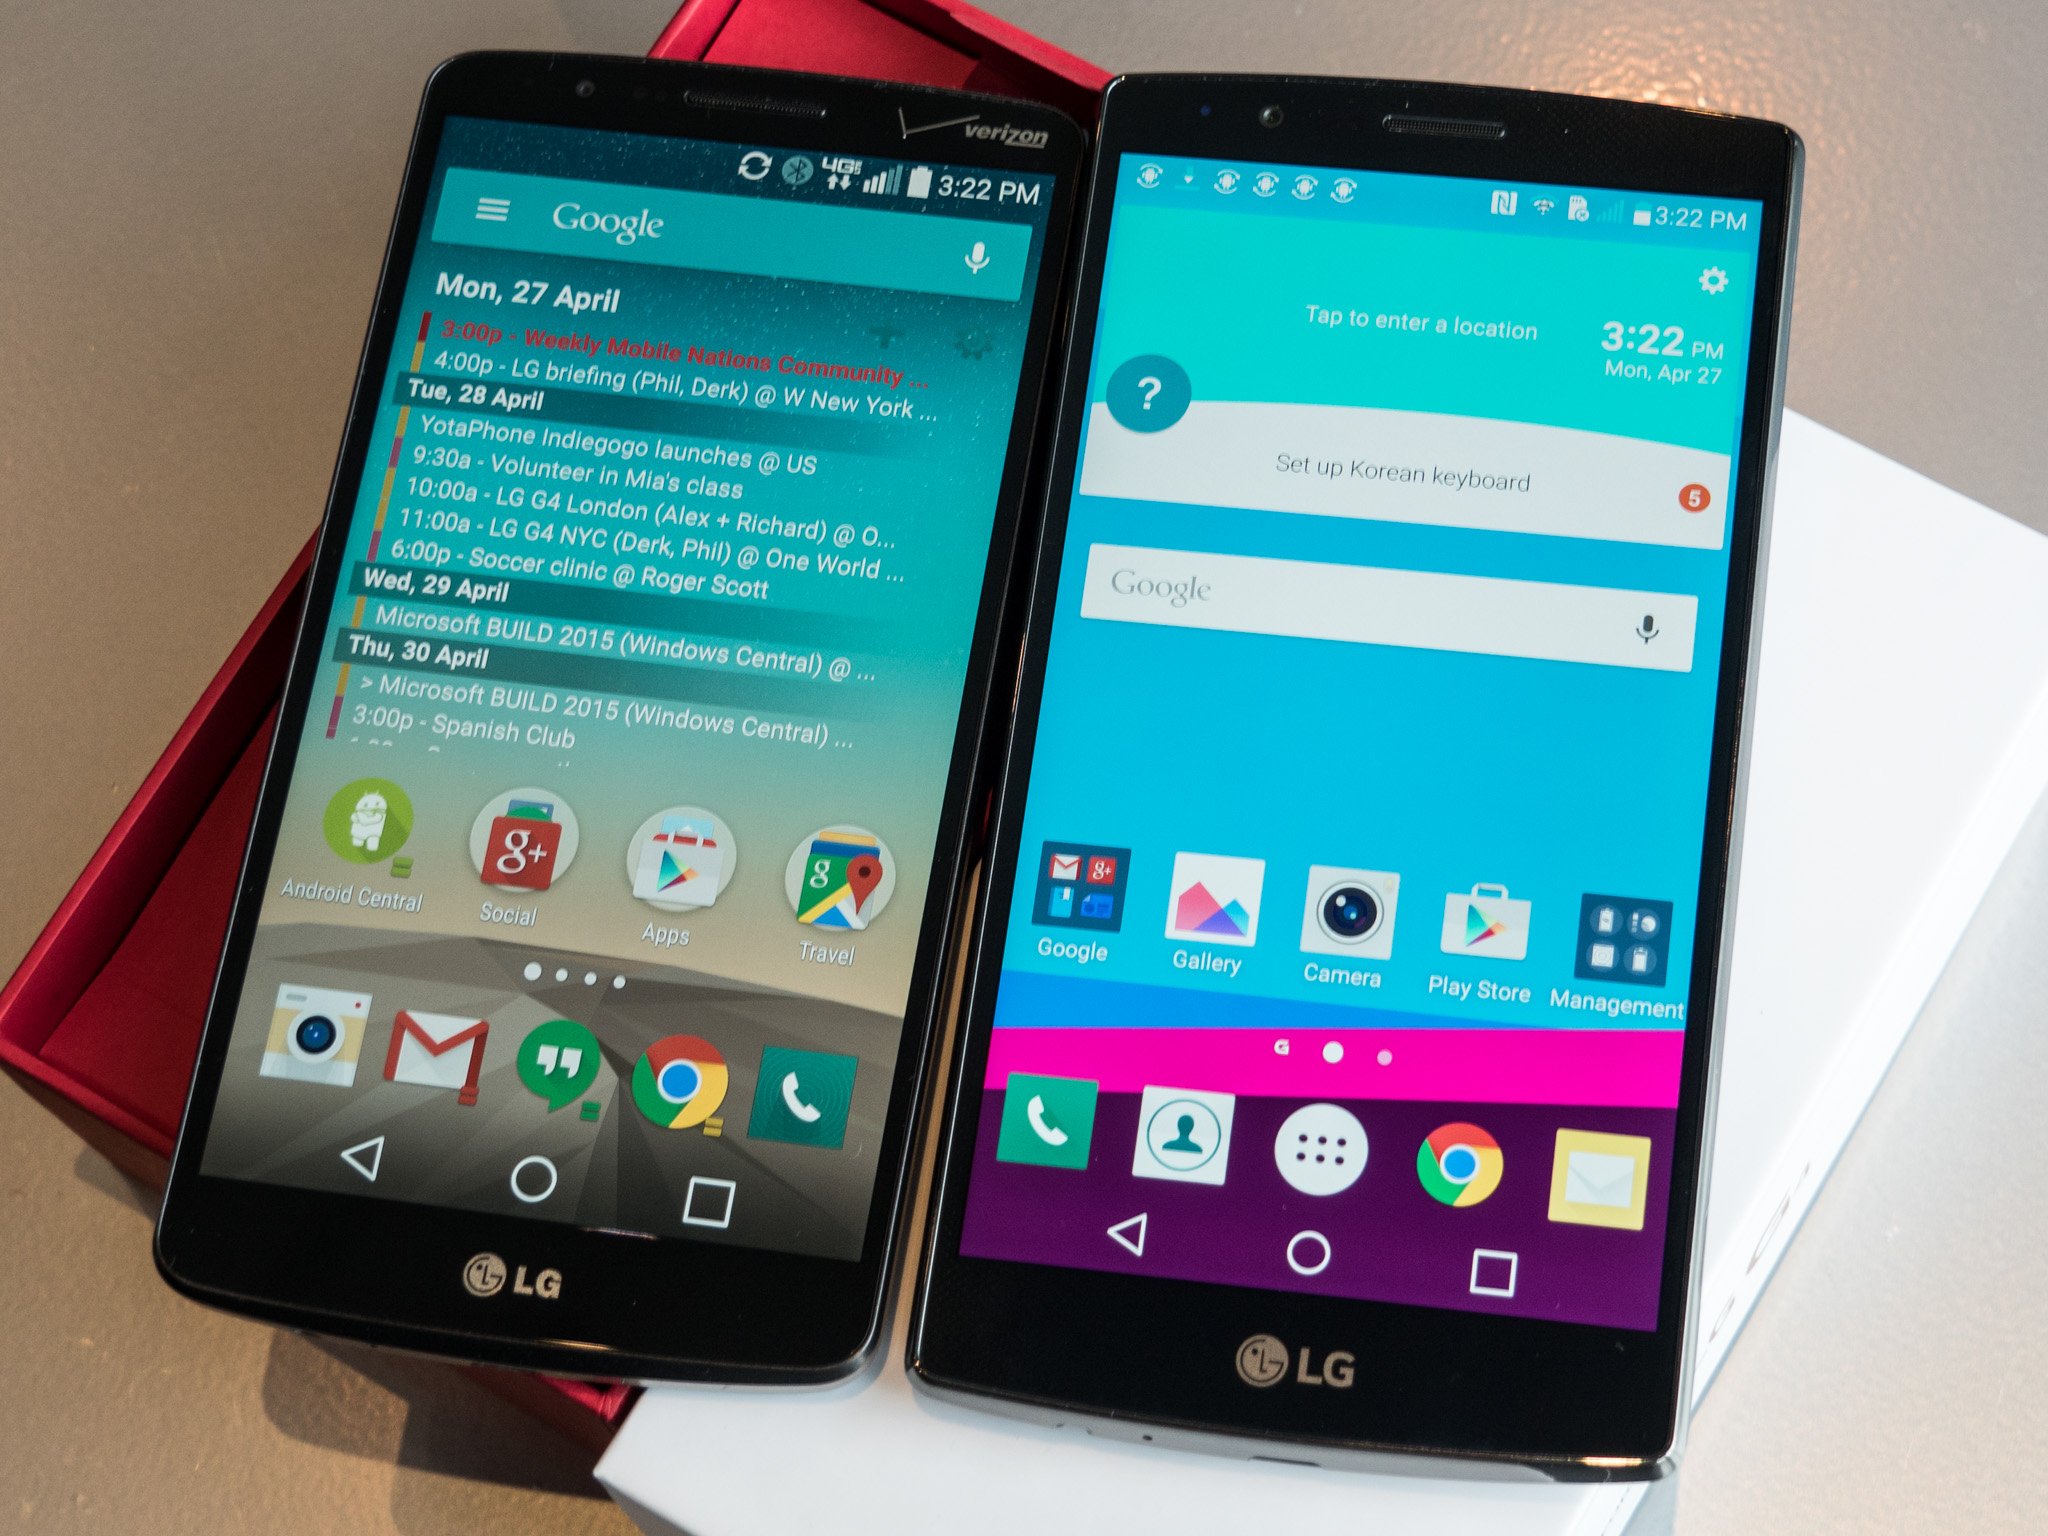 In pictures: The LG G4 vs. LG G3  Android Central